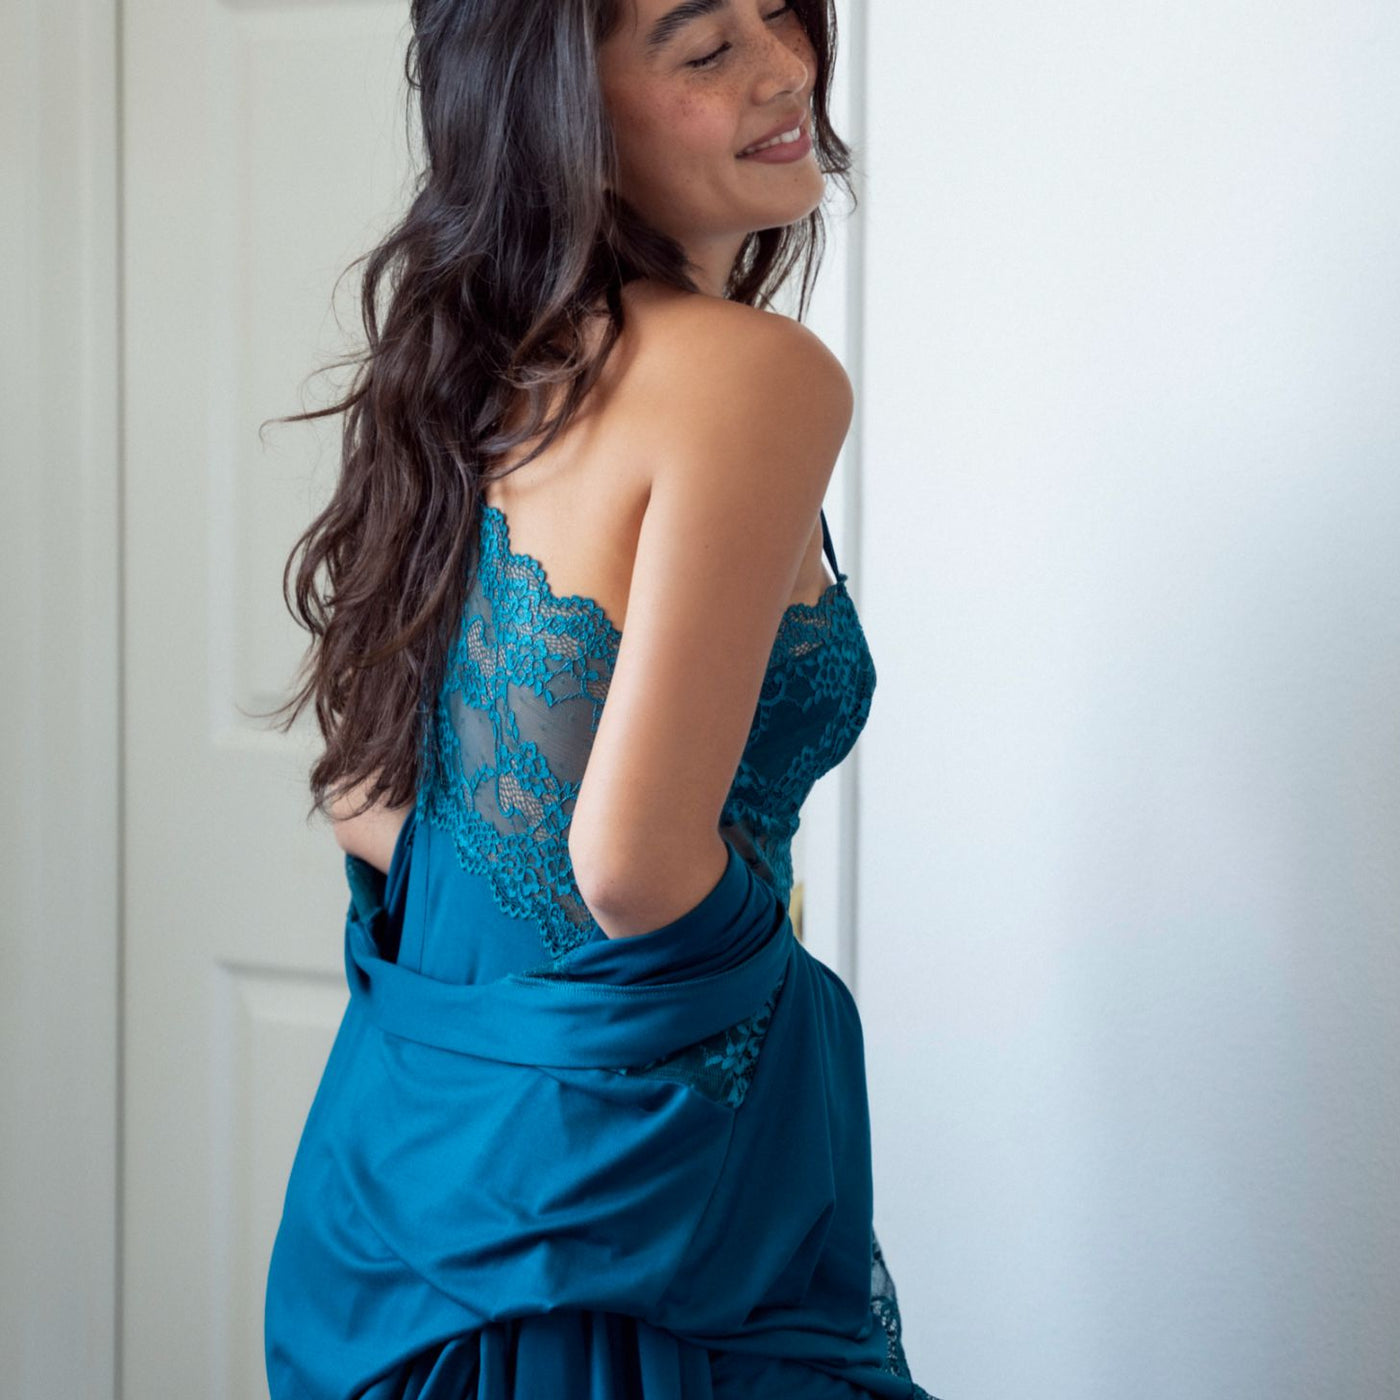 Jonquil Aegean Sea Chemise AGS010 in Deep Teal-Loungewear-Jonquil in Bloom-Deep Teal-XSmall-Anna Bella Fine Lingerie, Reveal Your Most Gorgeous Self!